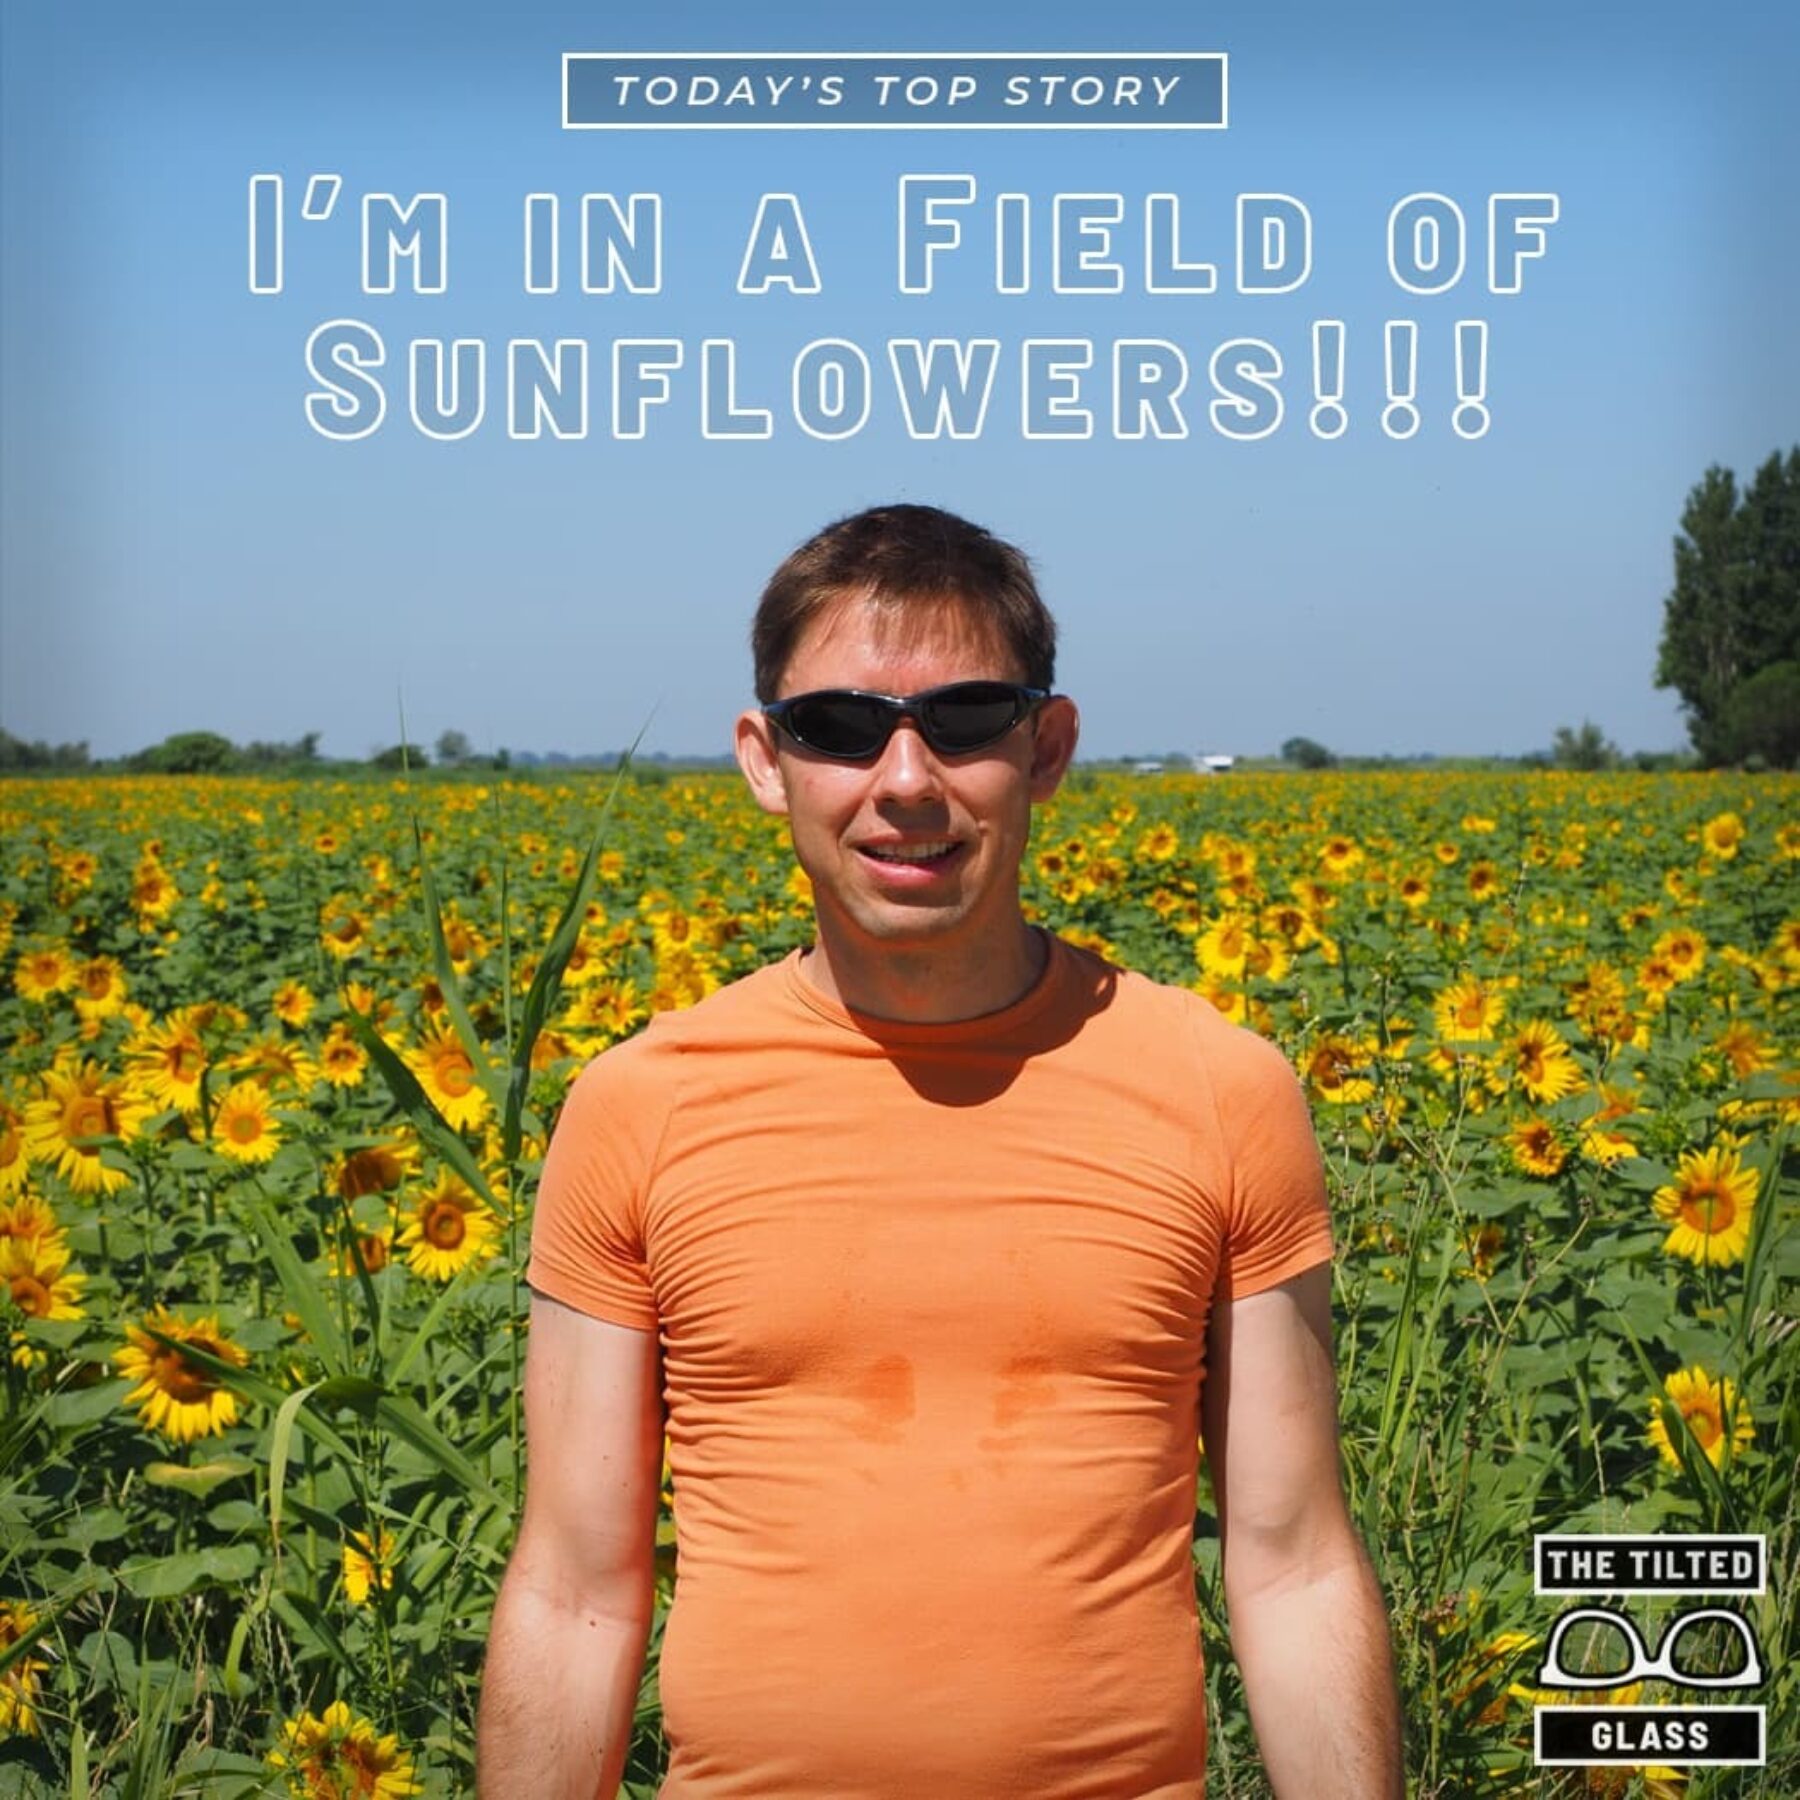 Today's Top Story: I’m in a Field of Sunflowers!!!